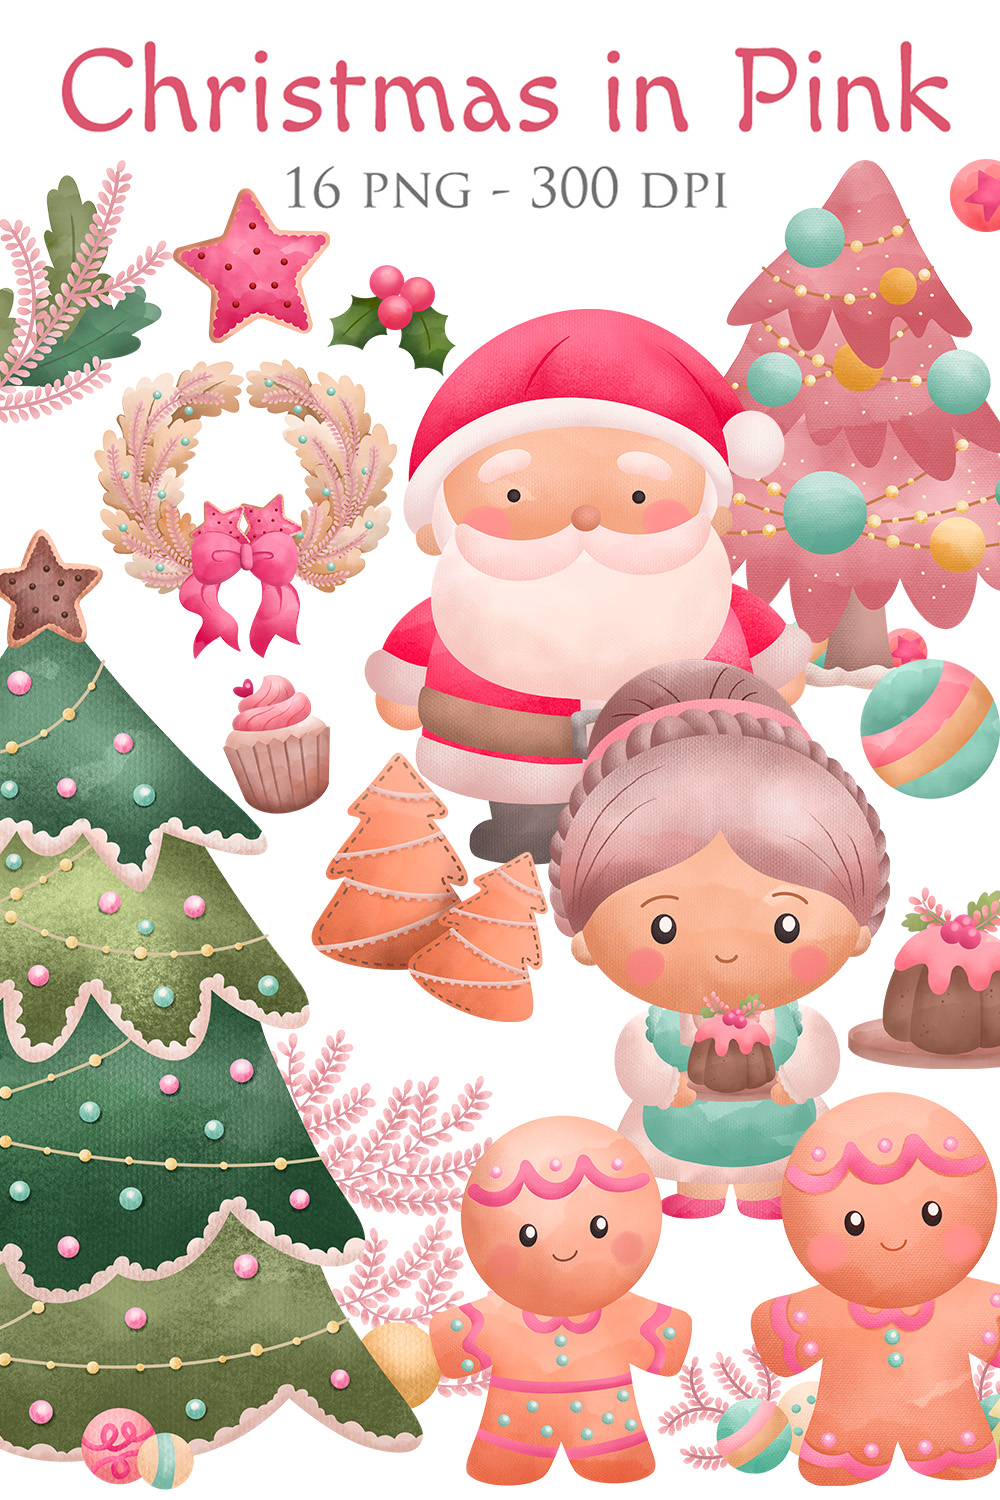 Watercolour Cute Seasonal December Christmas In Pink Decoration Background Santa Claus Gingerbread Grandmother Ornaments Tree Accessories Holiday Illustration Vector Clipart Sticker pinterest preview image.